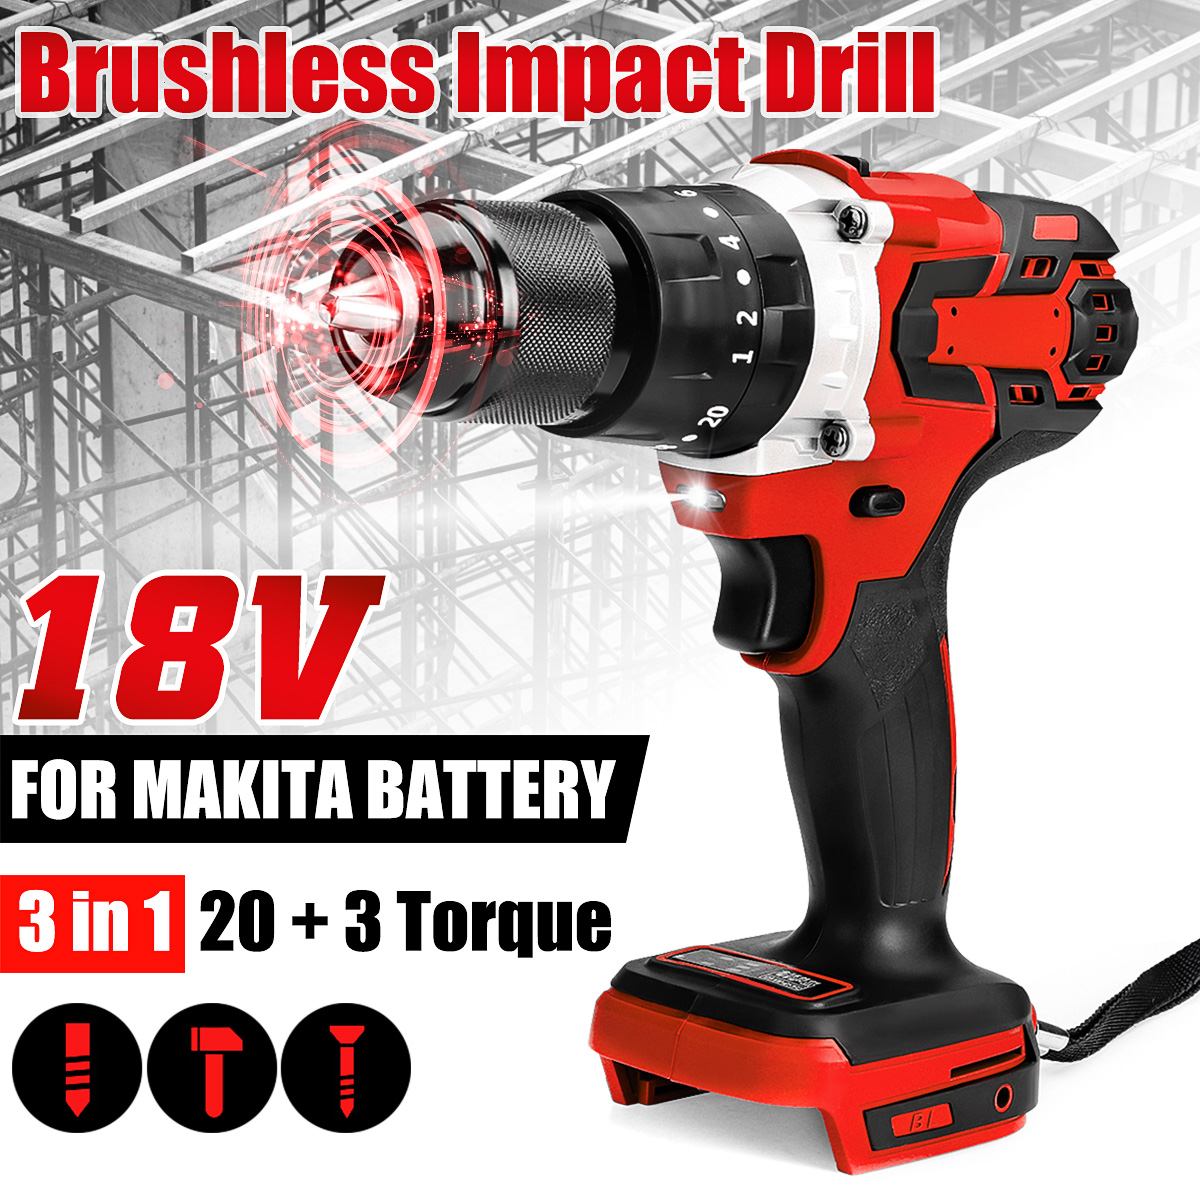 13mm-3-In-1-Brushless-Impact-Drill-Hammer-Cordless-Elctric-Hammer-Drill-Adapted-To-18V-Makita-Batter-1715080-3